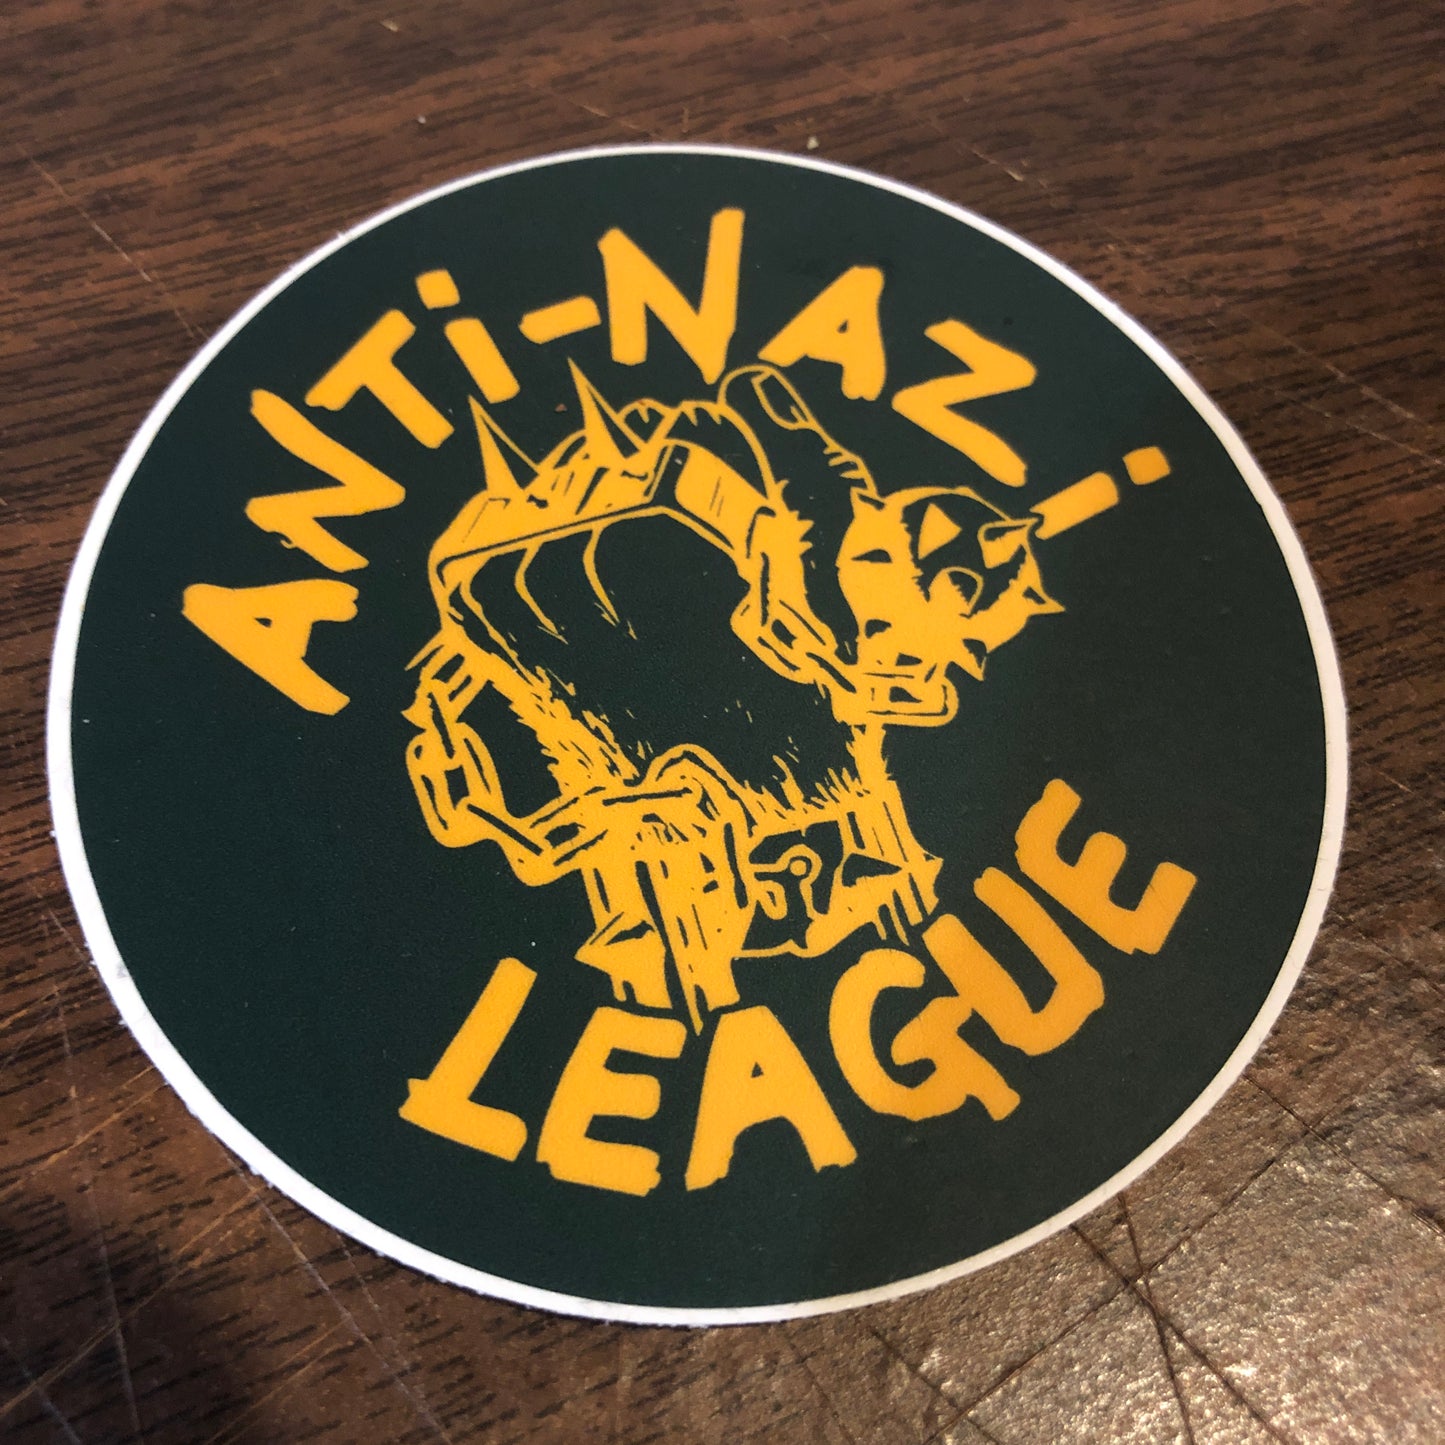 Stealworks "We Are... The League" Sticker